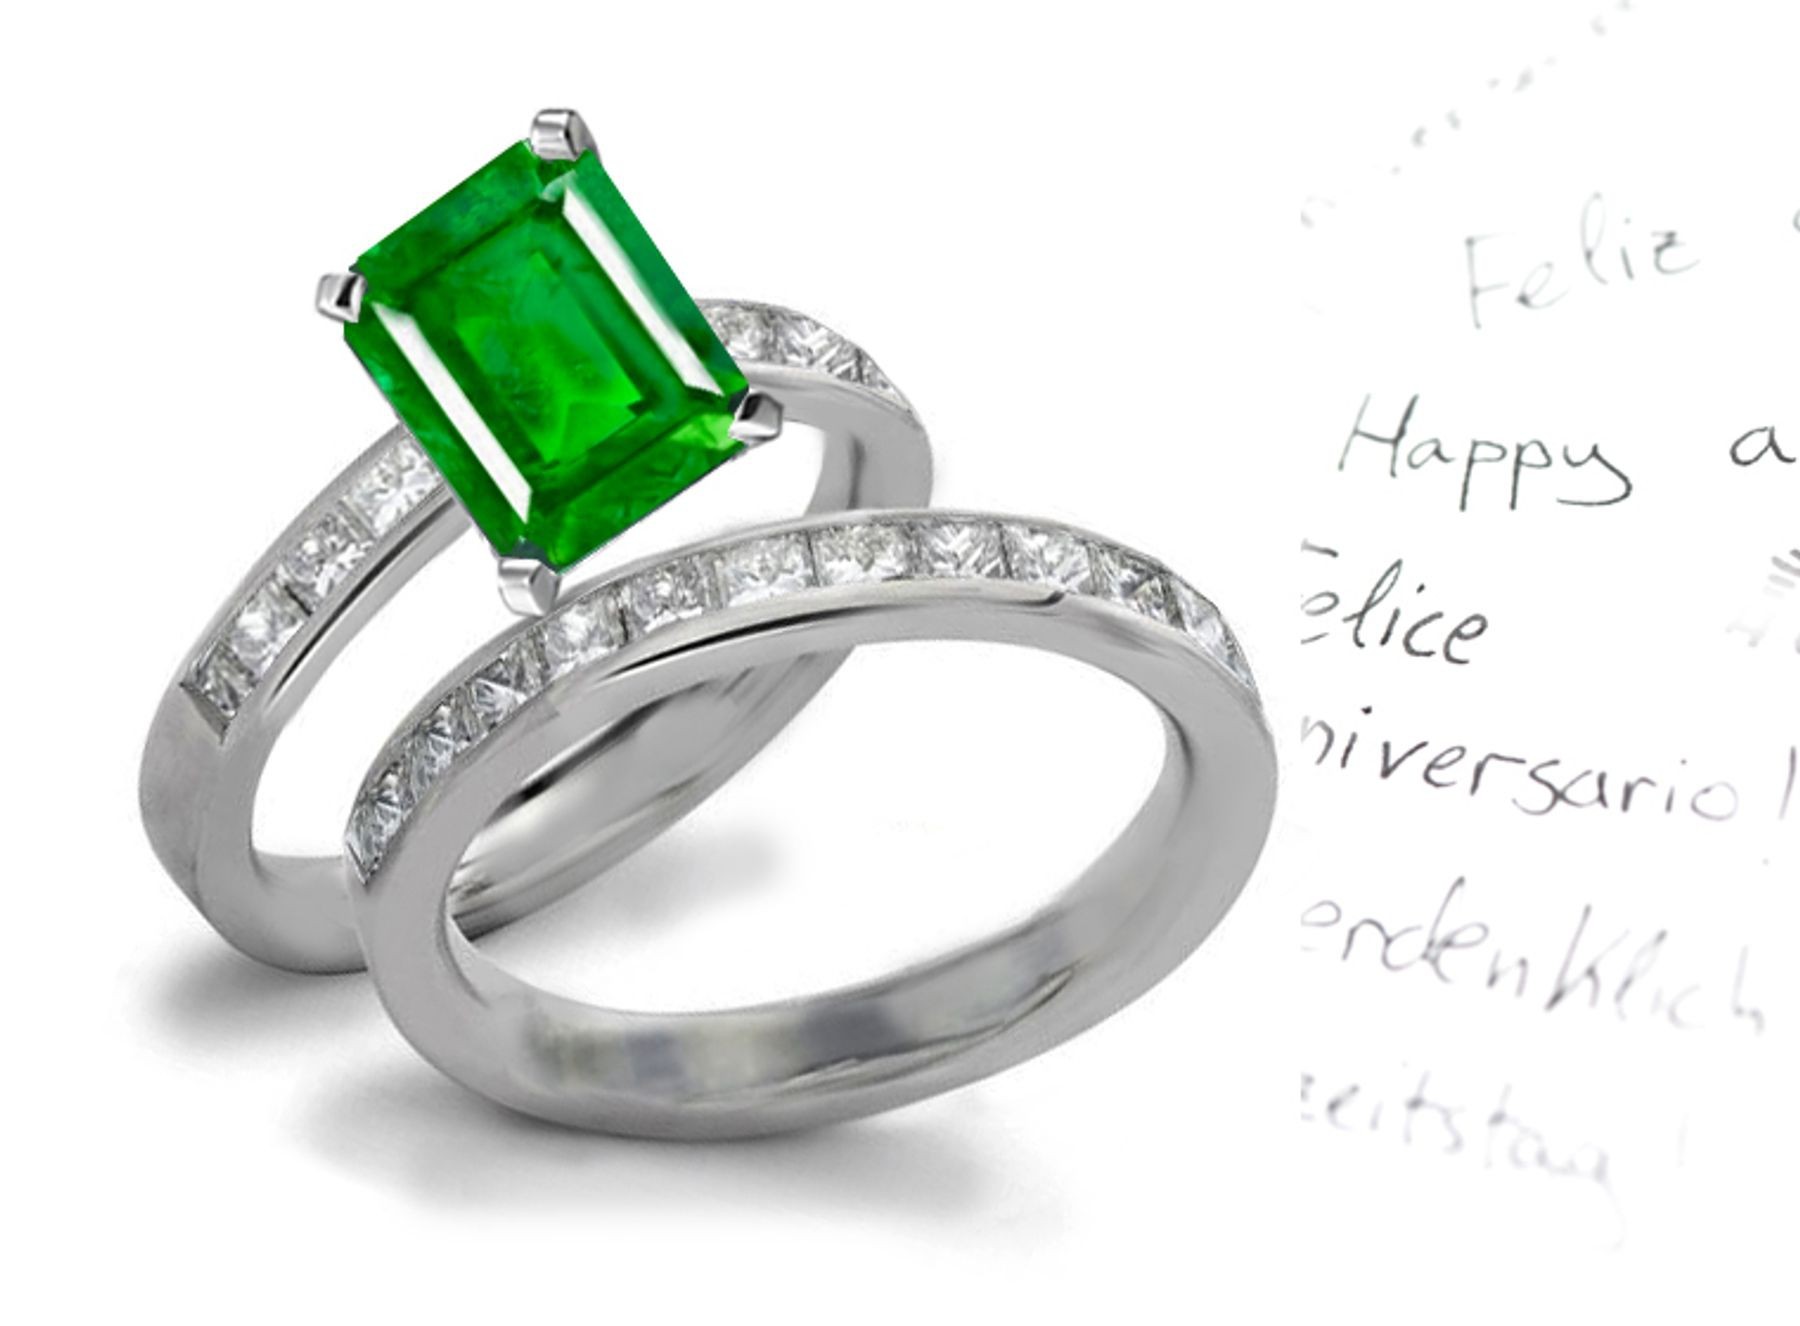 Fine Green Emerald Cut Emerald with Parallel Lines & Square Cut Diamond Accent Ring & Band